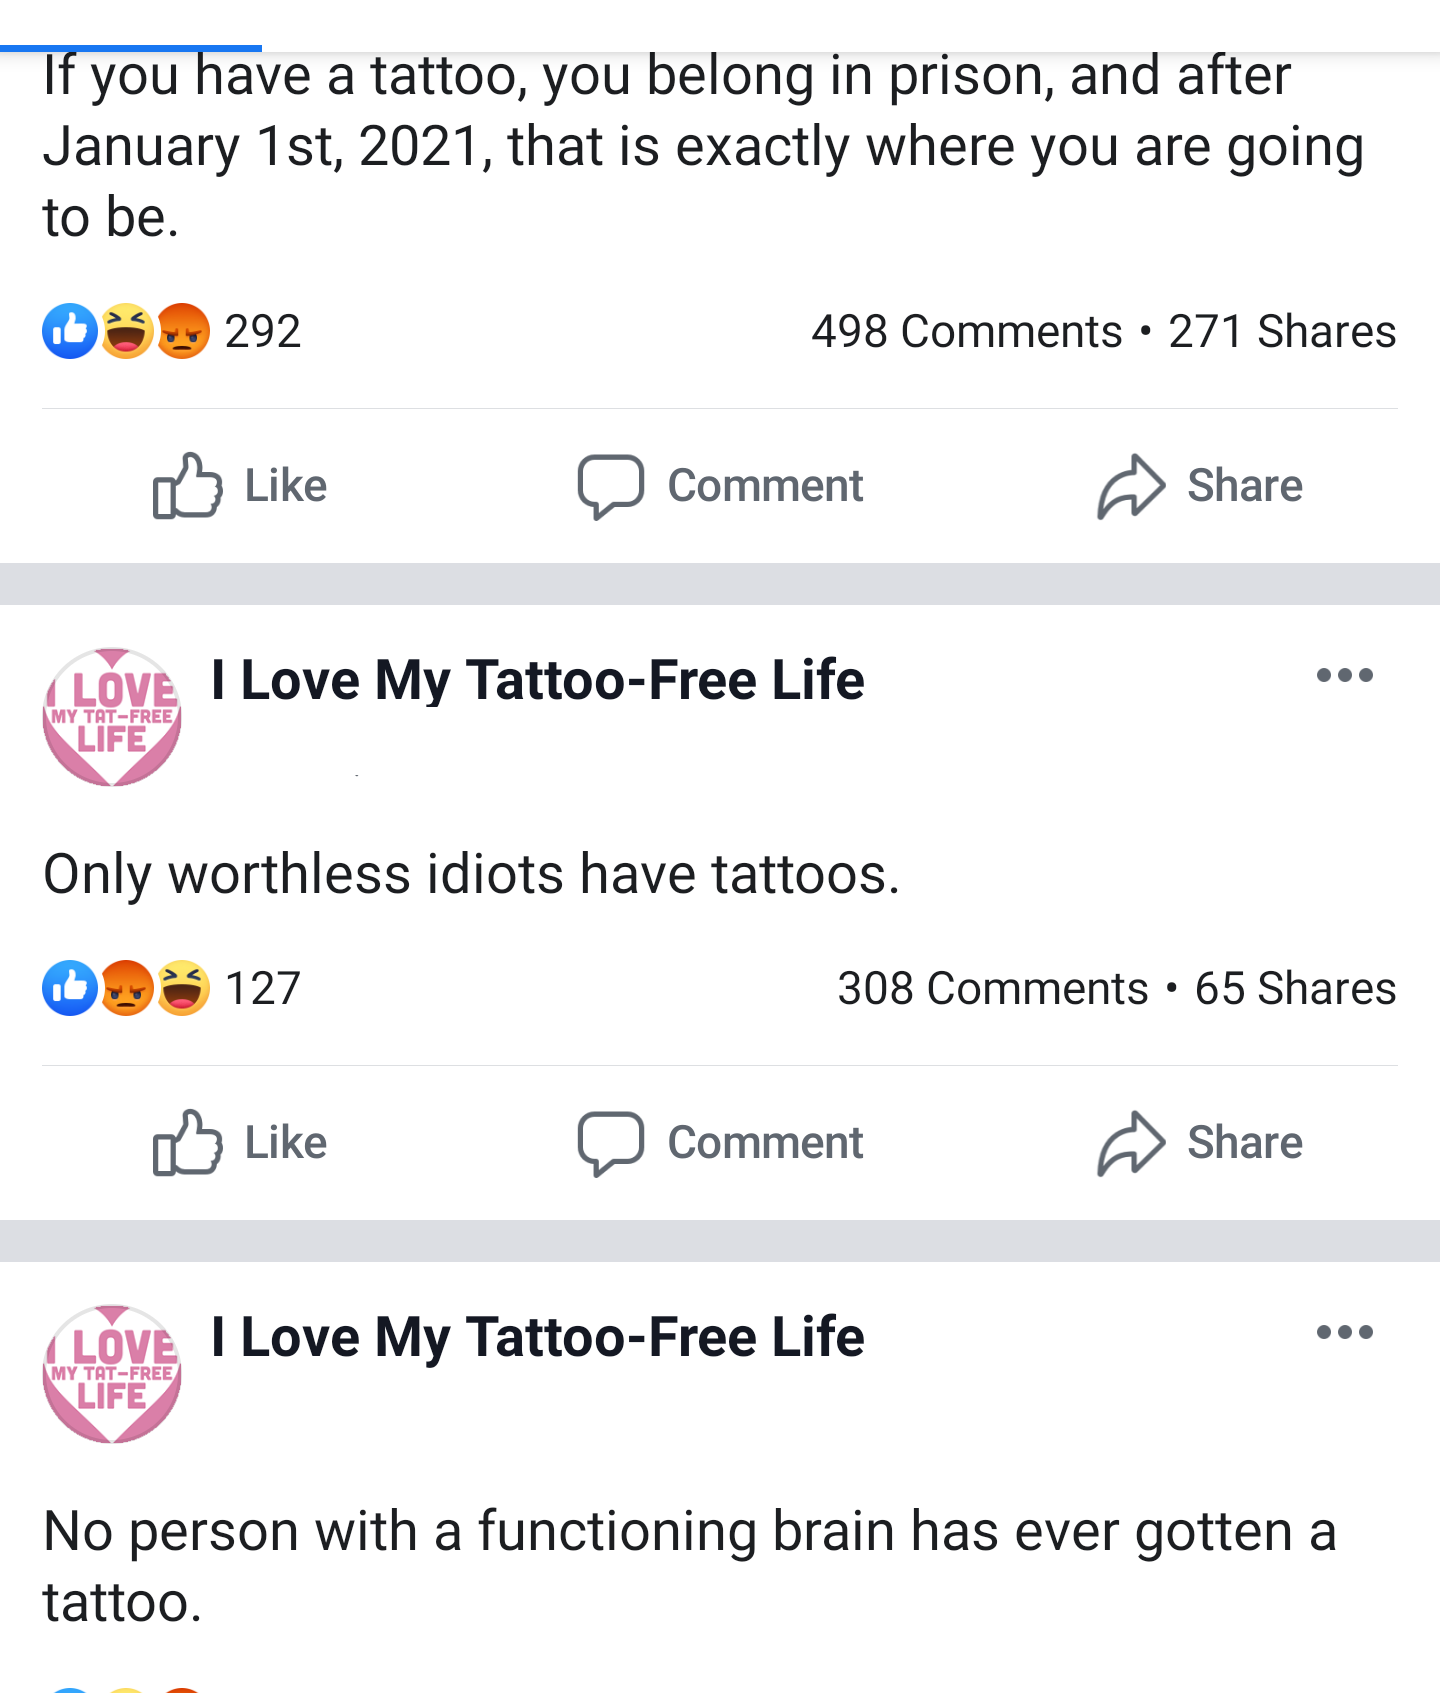 If you have a tattoo, you belong in prison, and after January 1st, 2021, that is exactly where you are going to be. 03292 498 271 vu Comment Love I Love My TattooFree Life My TatFree rthless idiots have tattoos. 093 127 308 65 Comment Love I Love My…